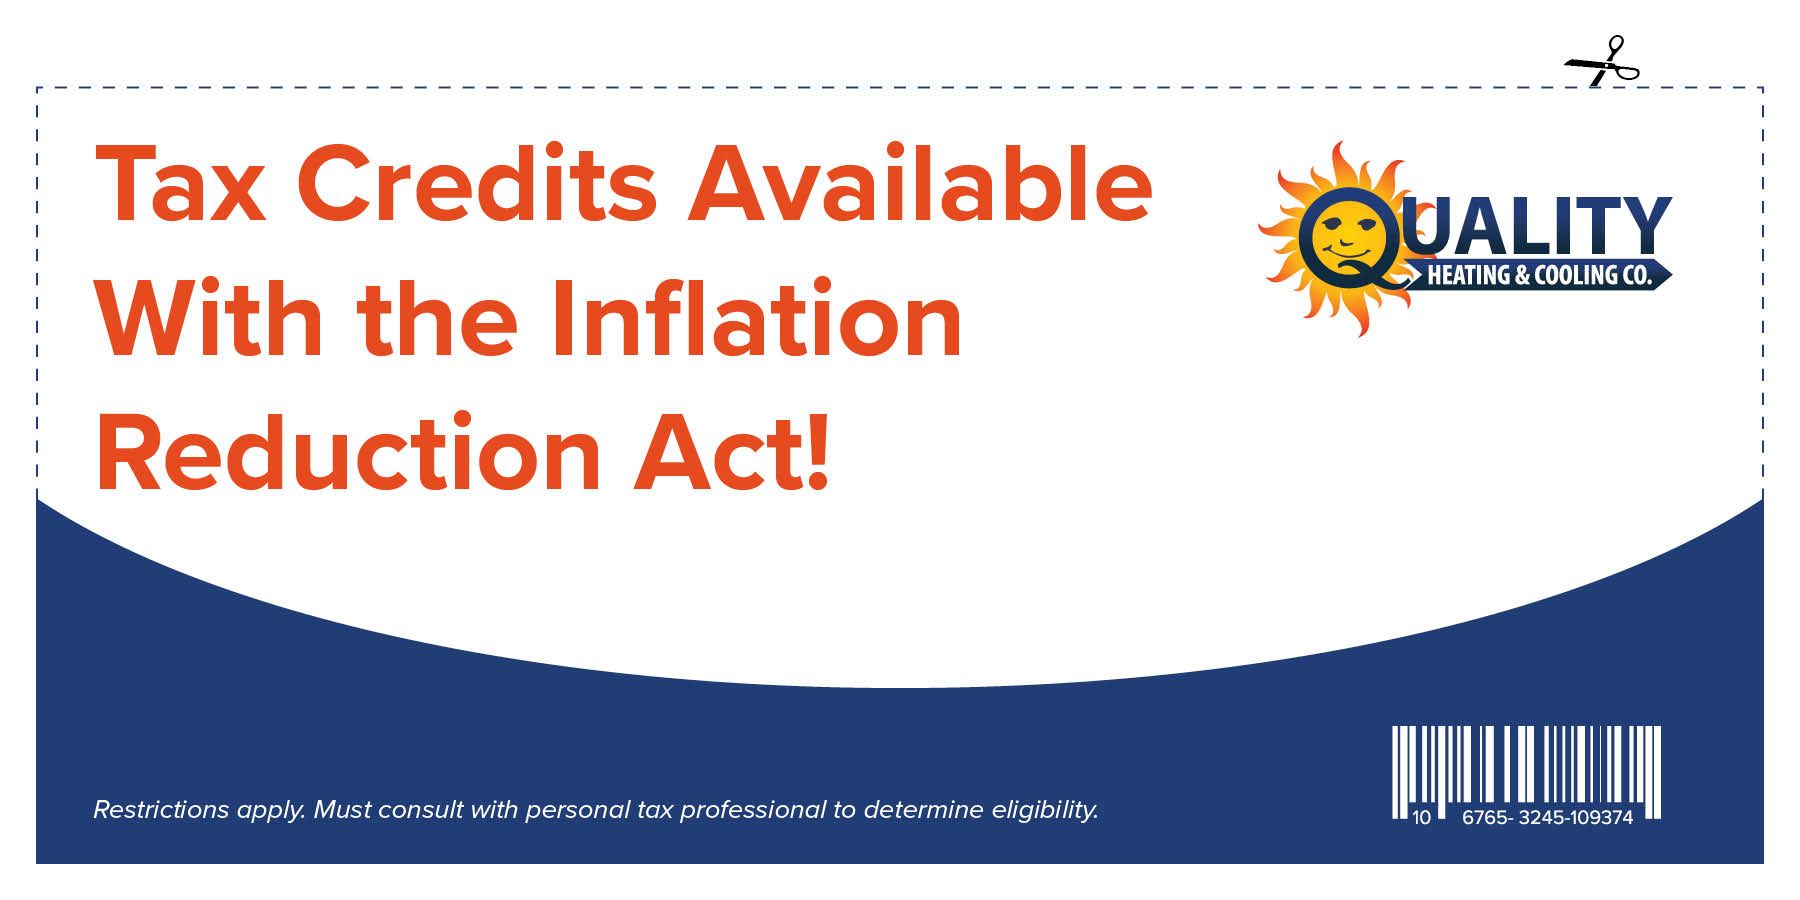 Tax credits available with the inflation reduction act!